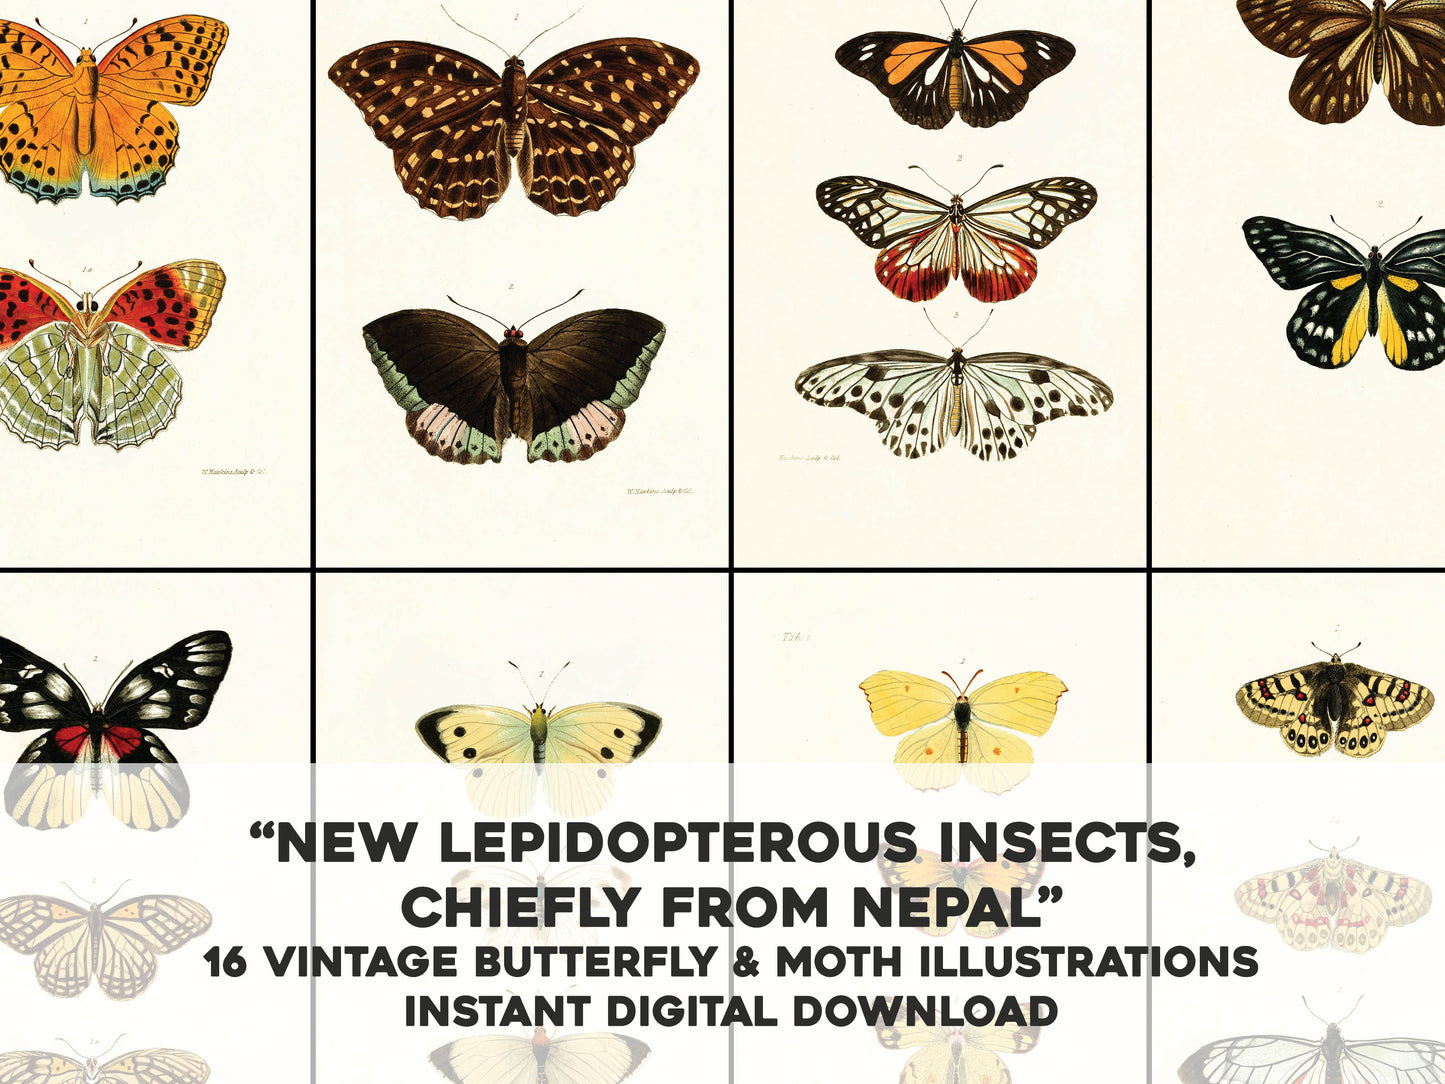 Lepidoptera from Nepal [16 Images]